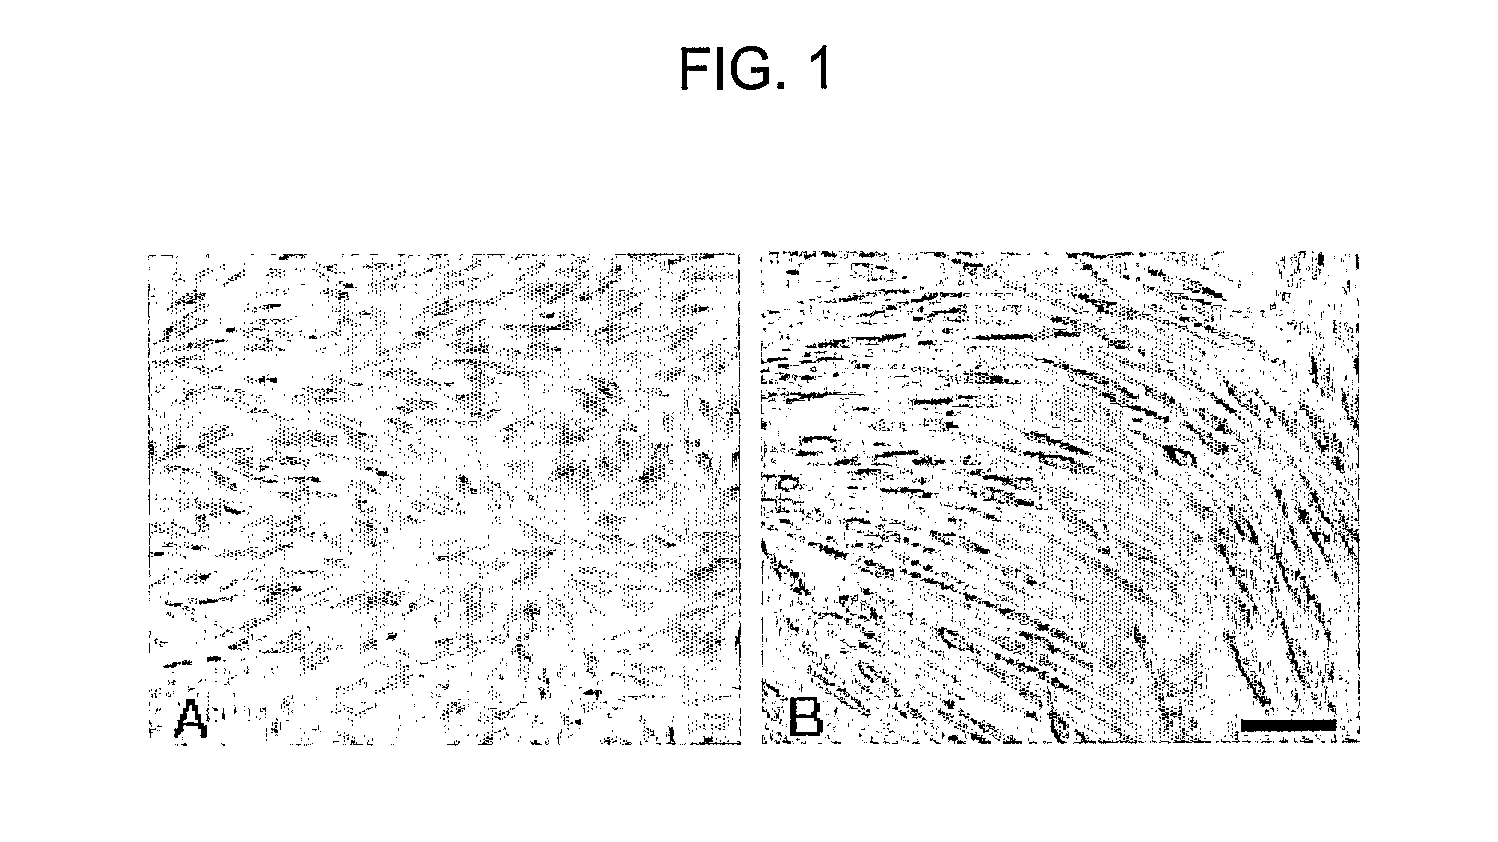 Method for isolating and culturing multipotent progenitor/stem cells from umbilical cord blood and method for inducing differentiation thereof